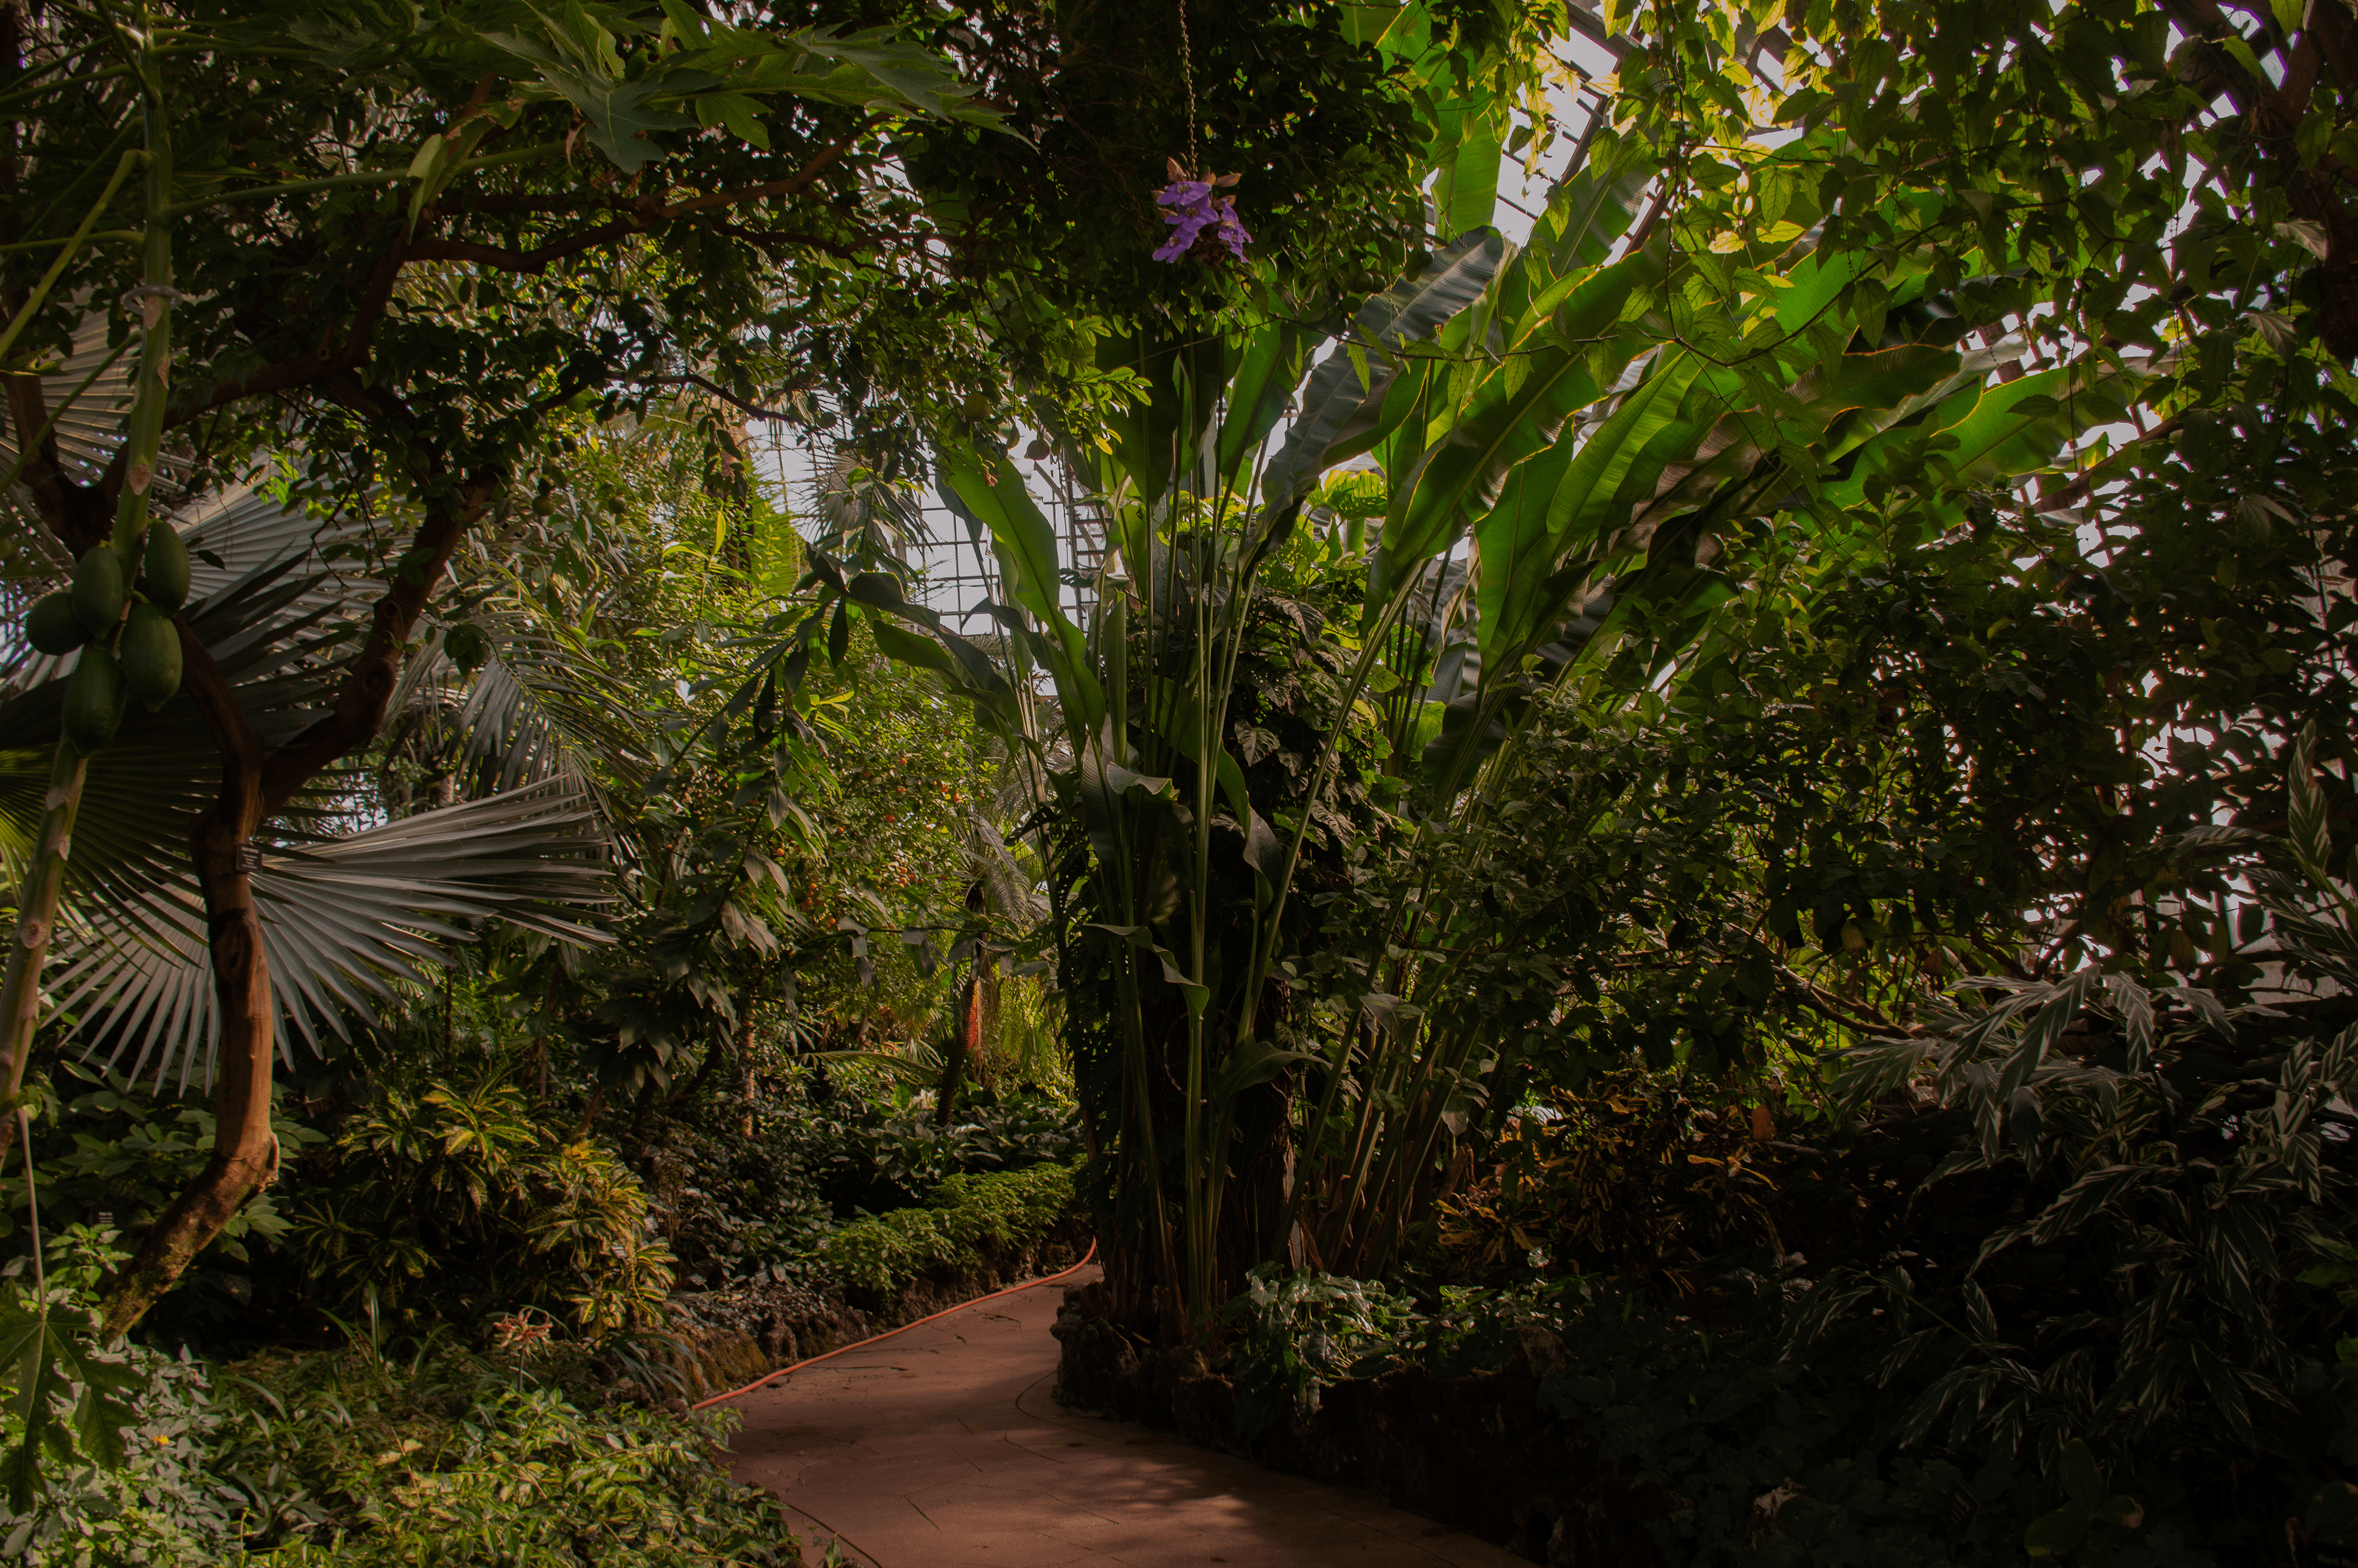 A pathway through the conservatory with tall plants creating an arch over a part of the pathway and a beautiful orange tree toward the back of the path.